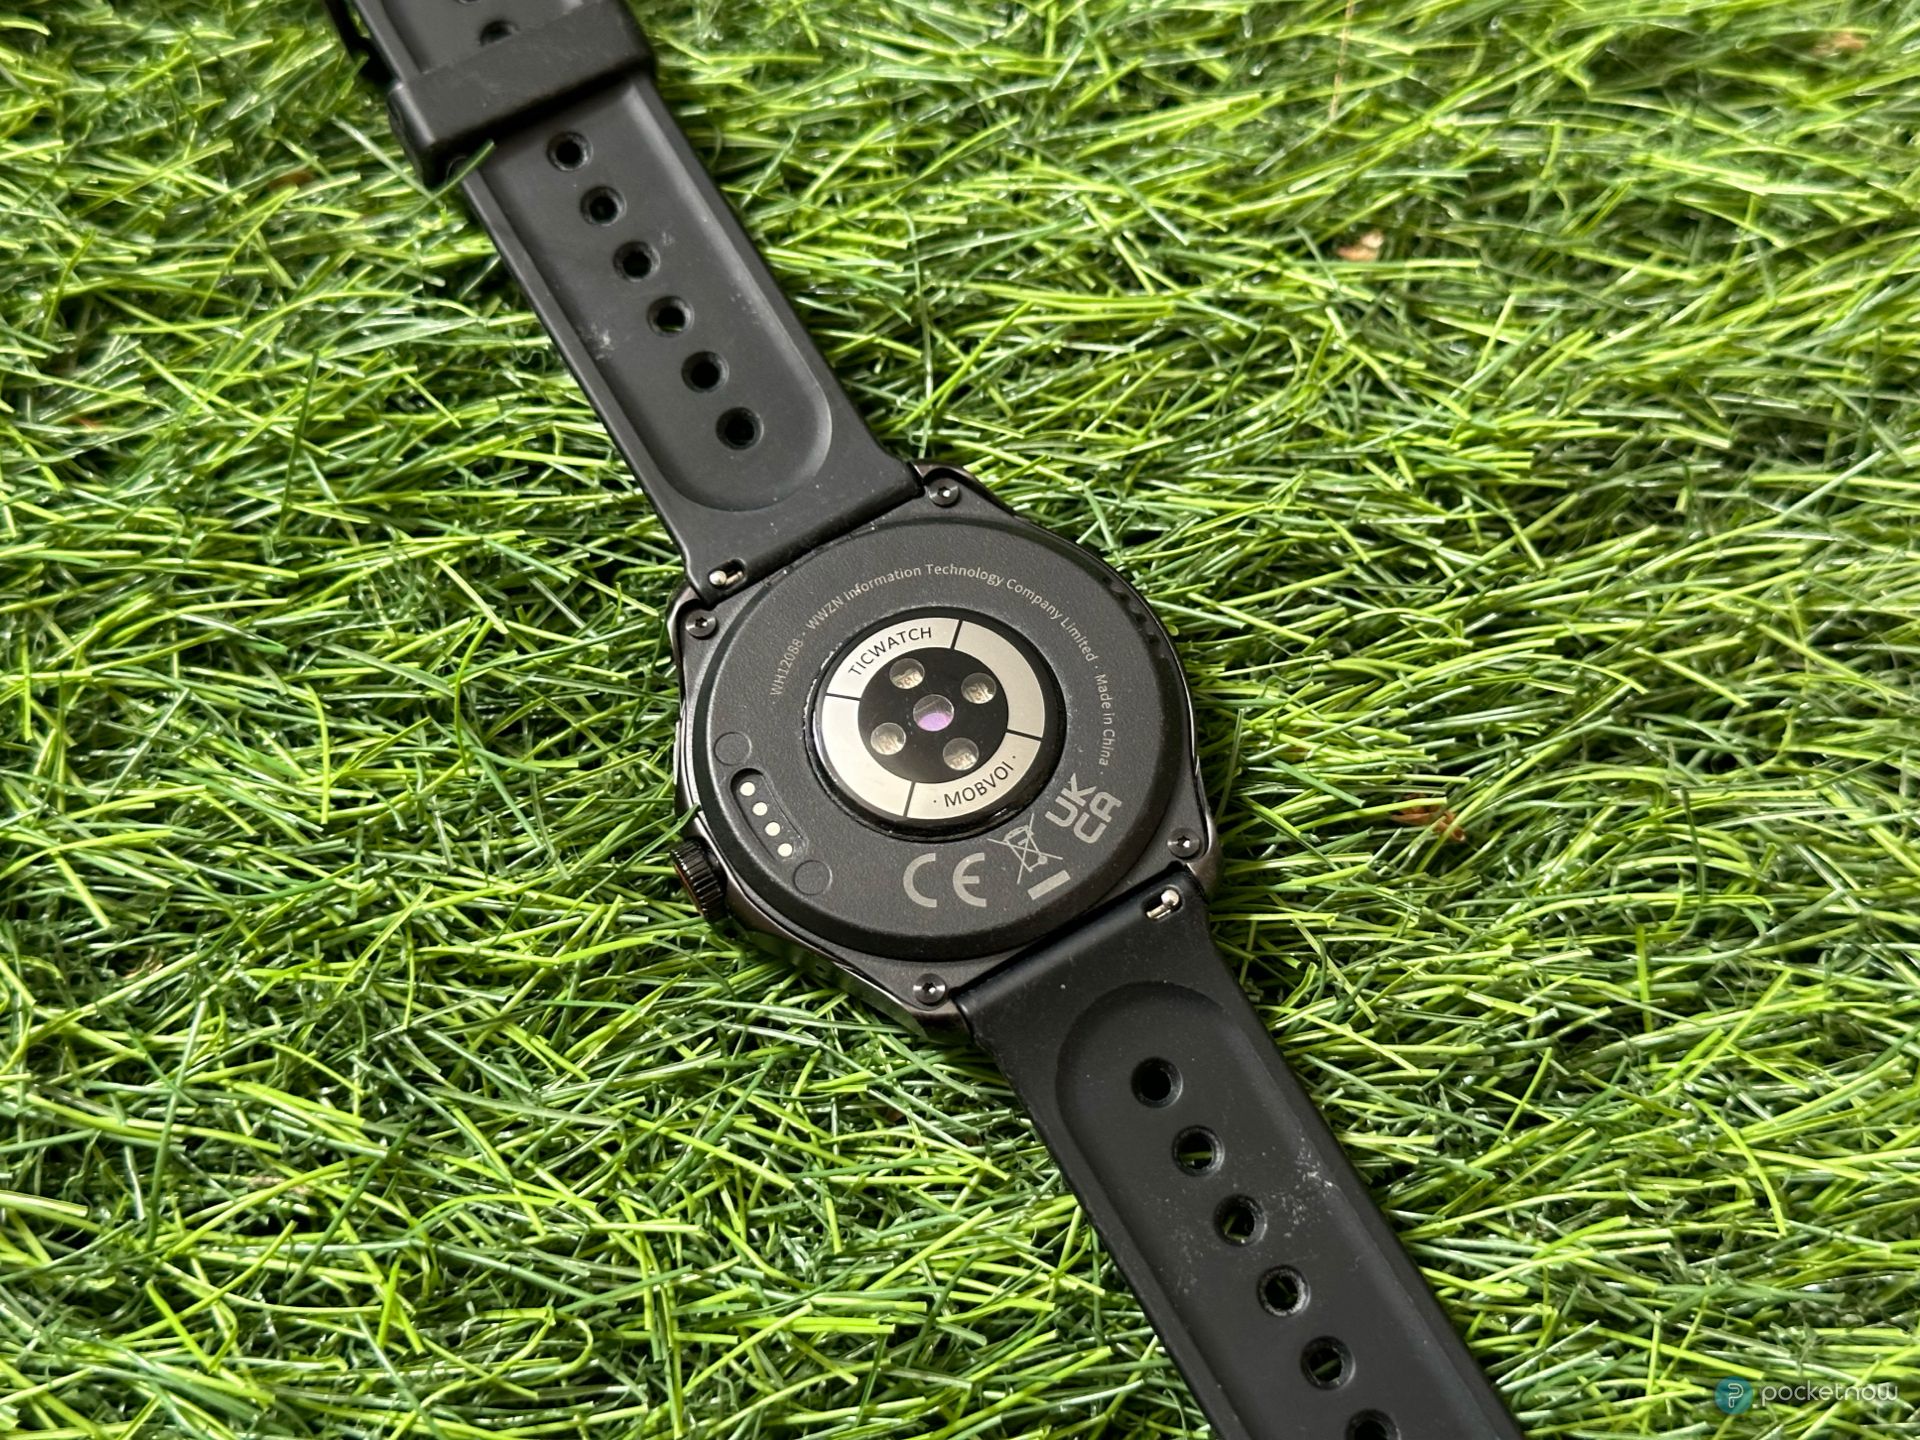 Mobvoi TicWatch Pro 5 review